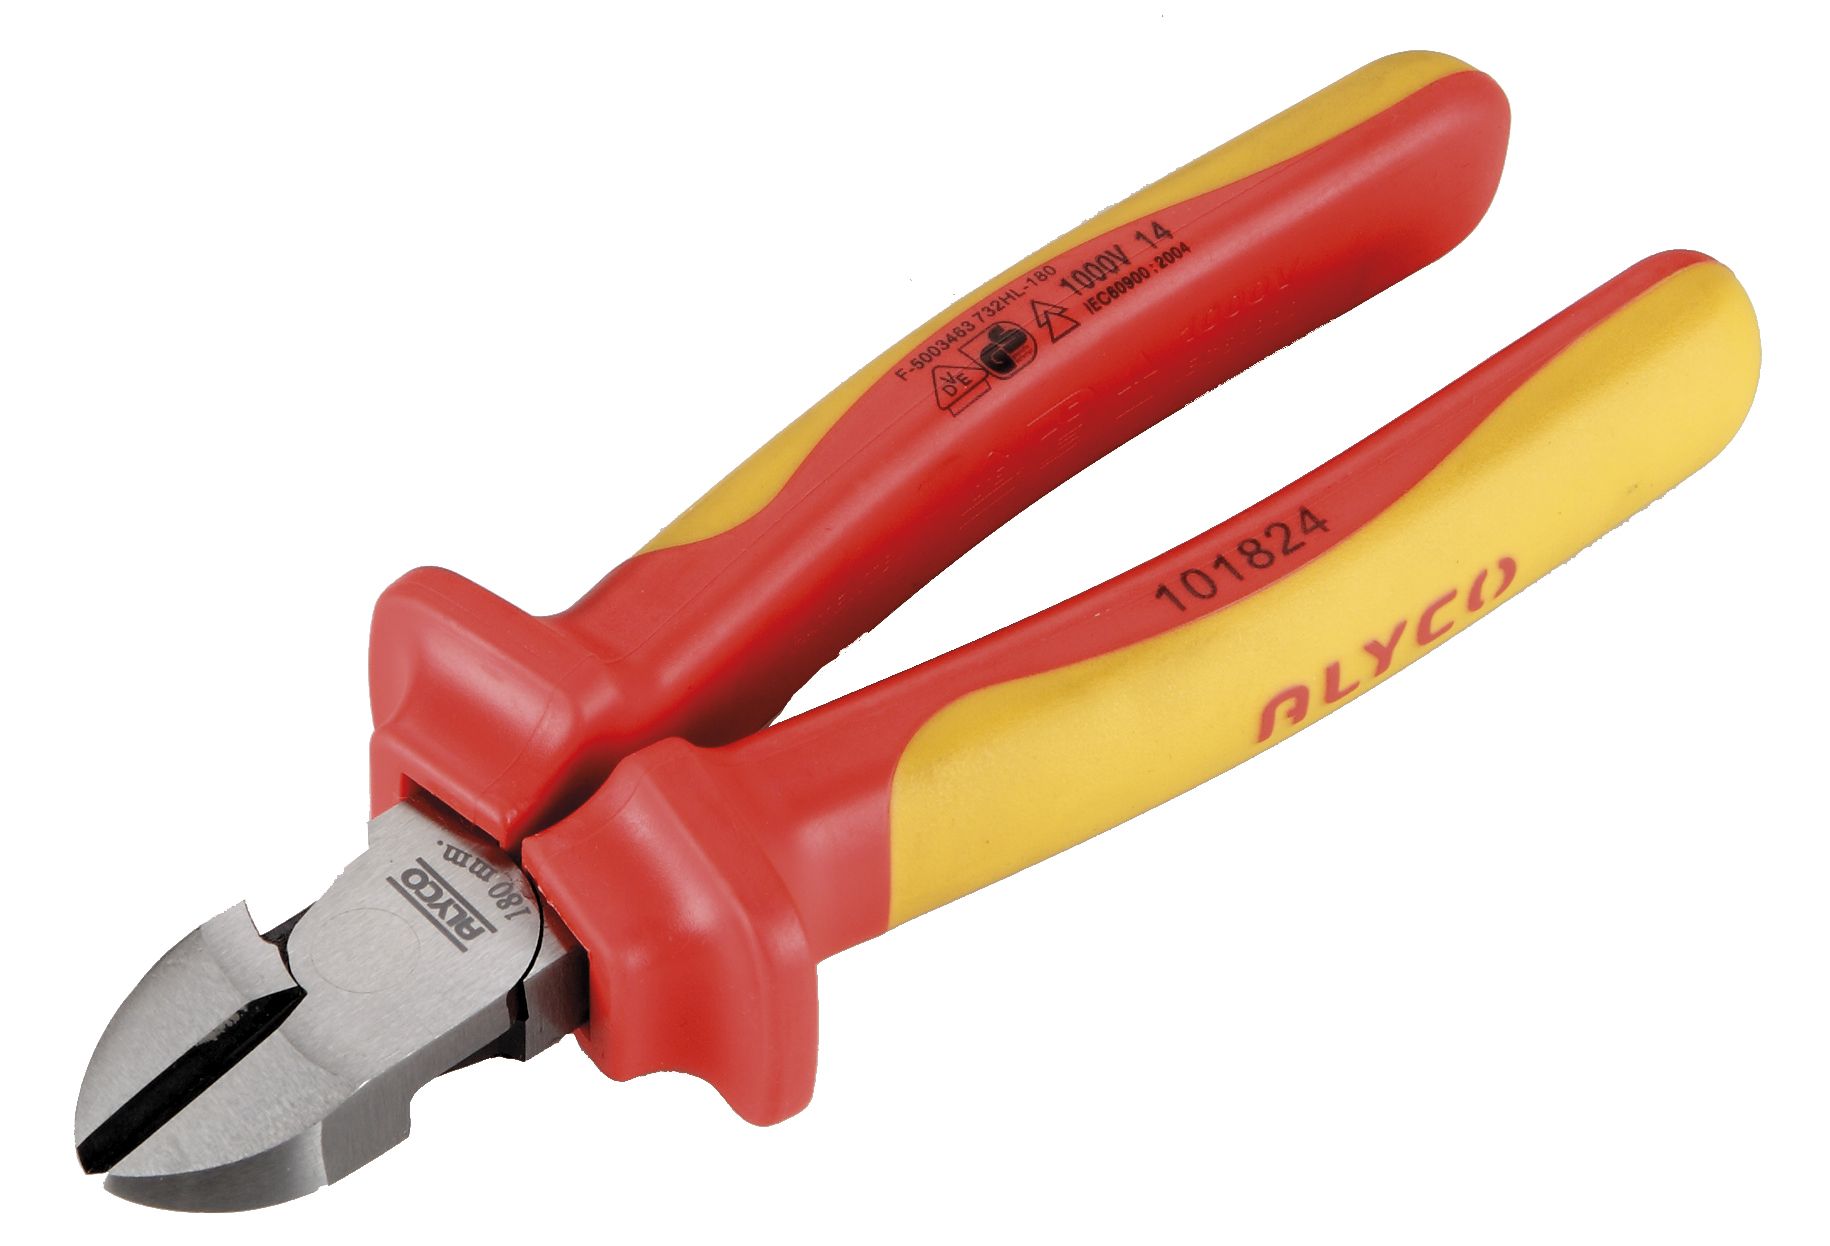 Curved Needle Nose Pliers With Cutting Edge ALYCO, Products